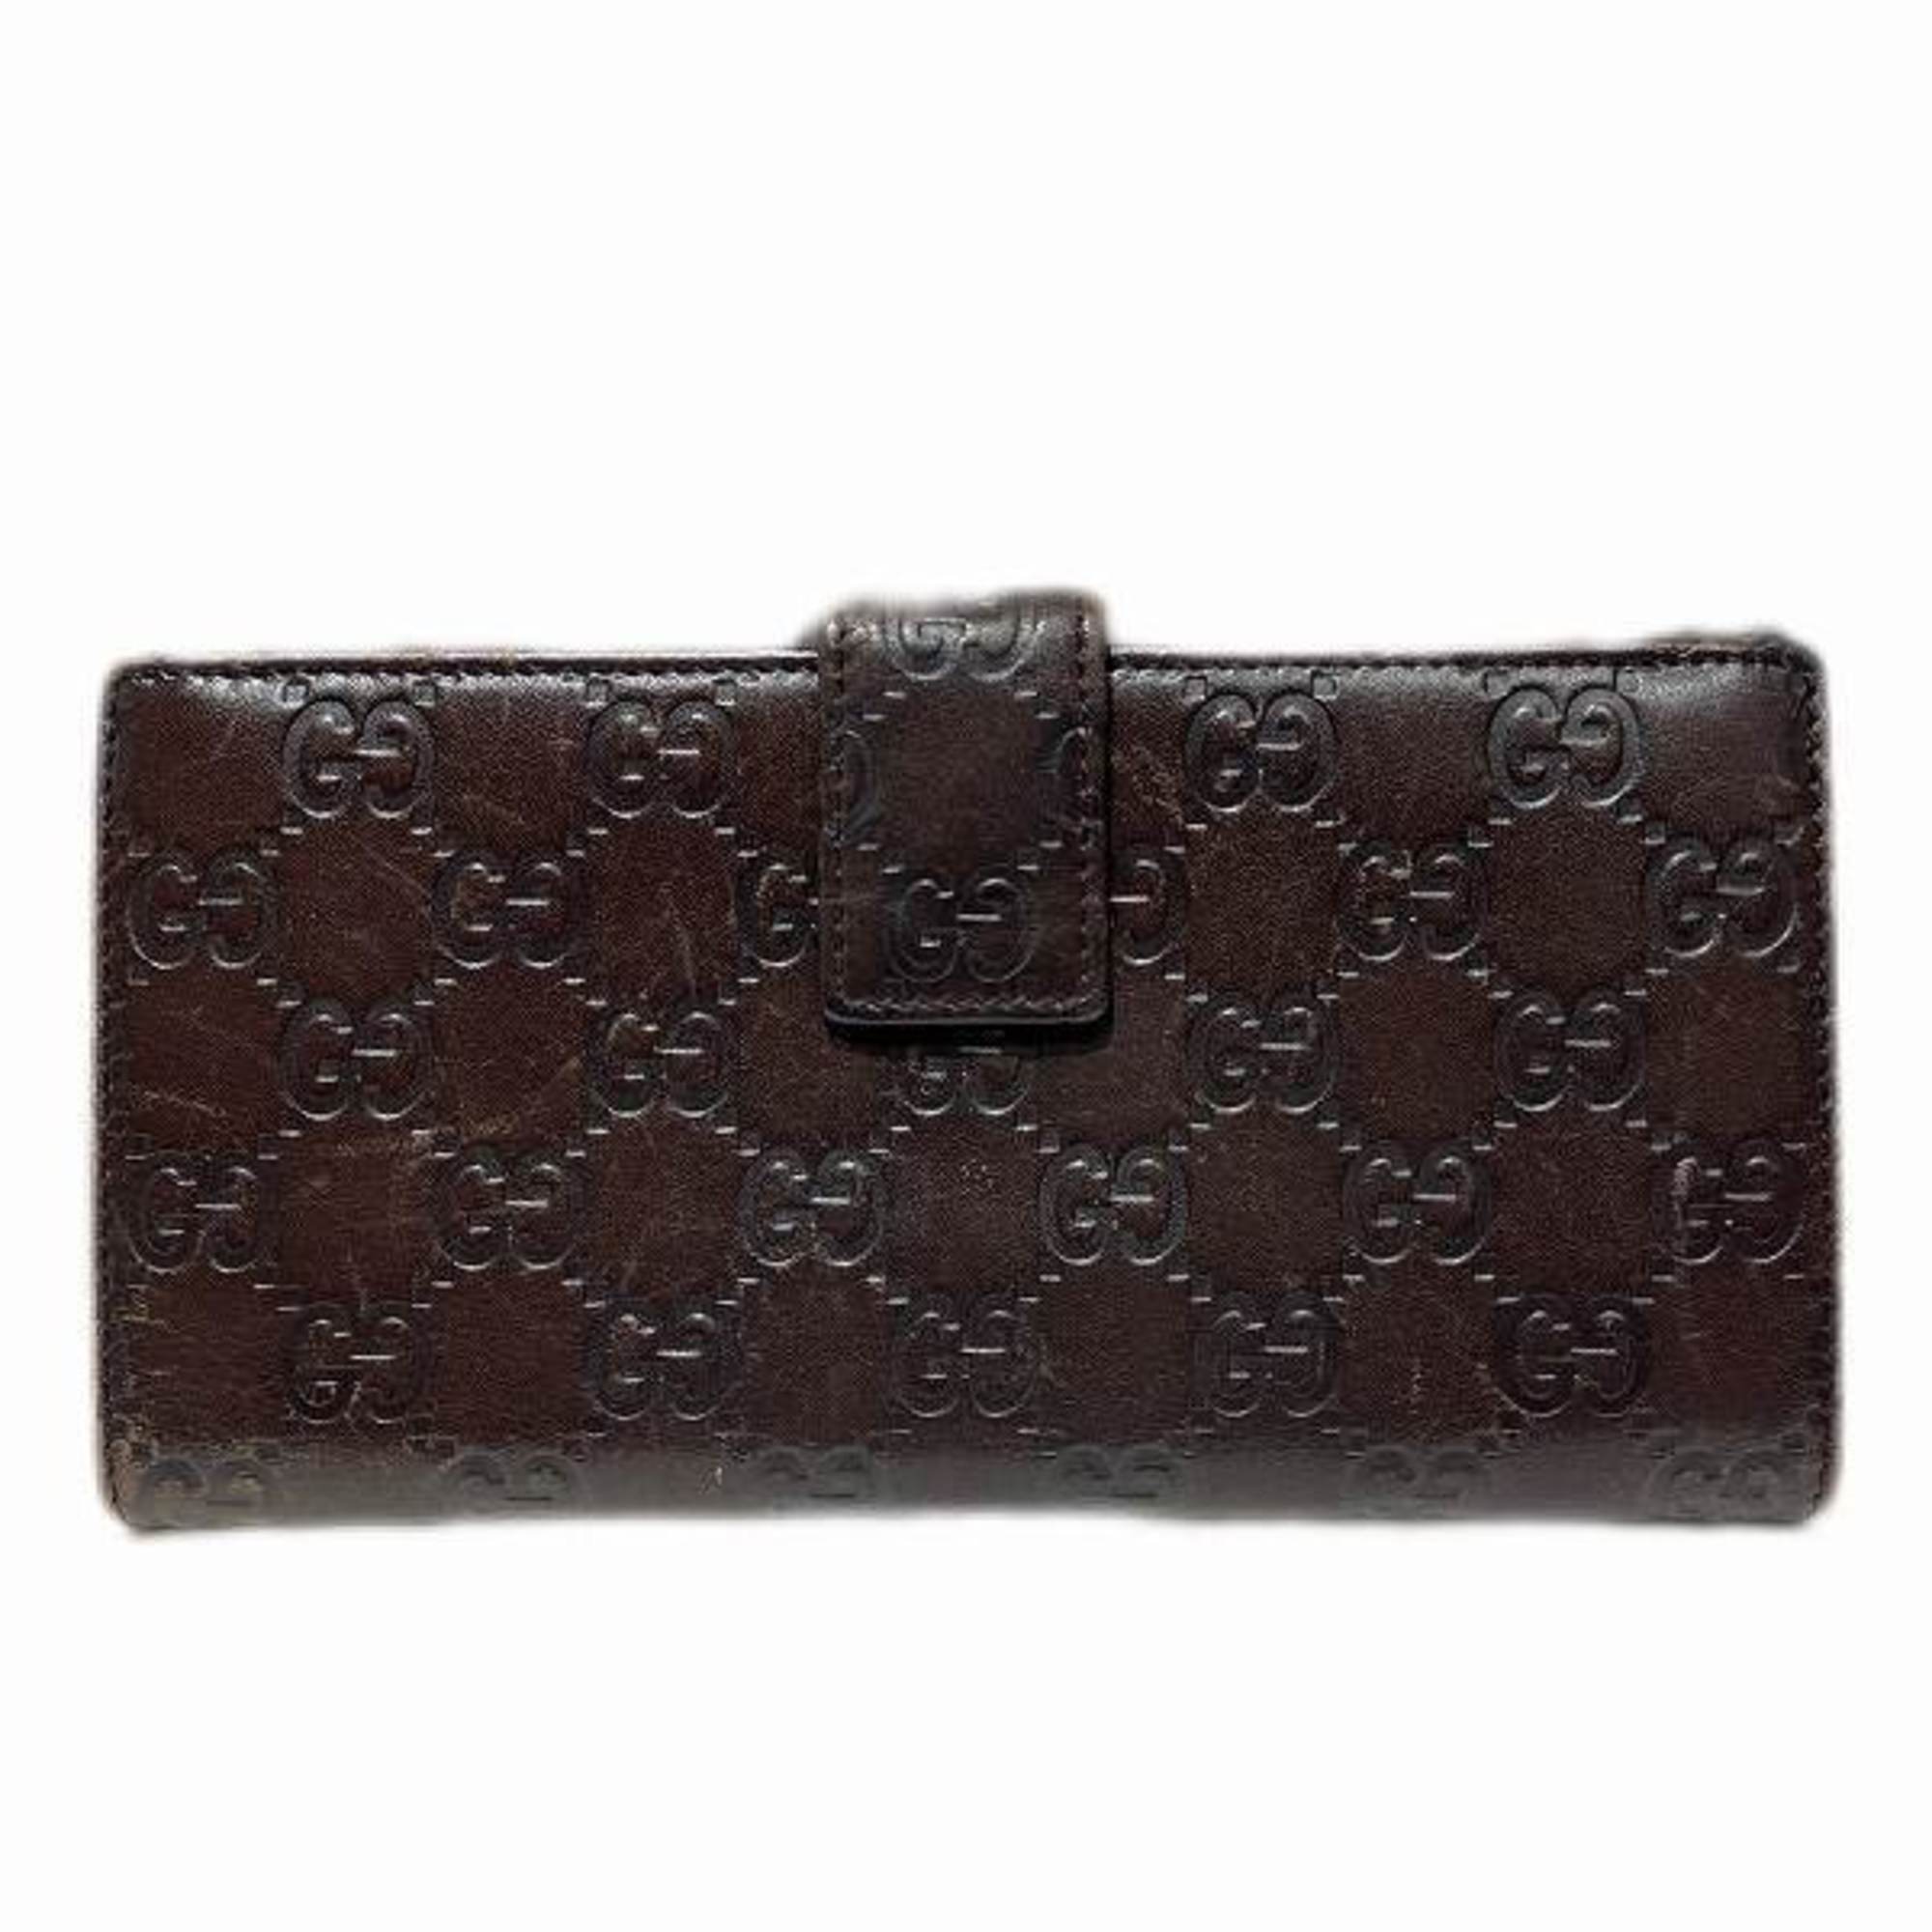 Gucci GUCCI Guccisima W hook leather 112715.0416 long wallet ladies